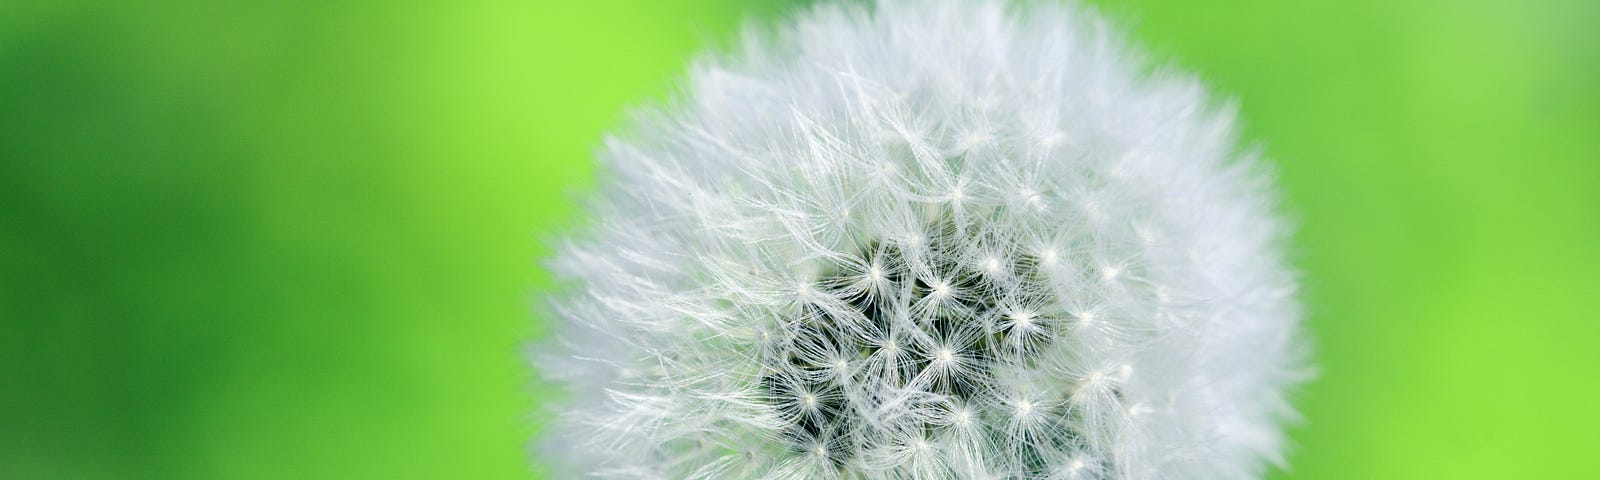 a close up of a pappus (the puff) of a dandelion against a striking light green background.